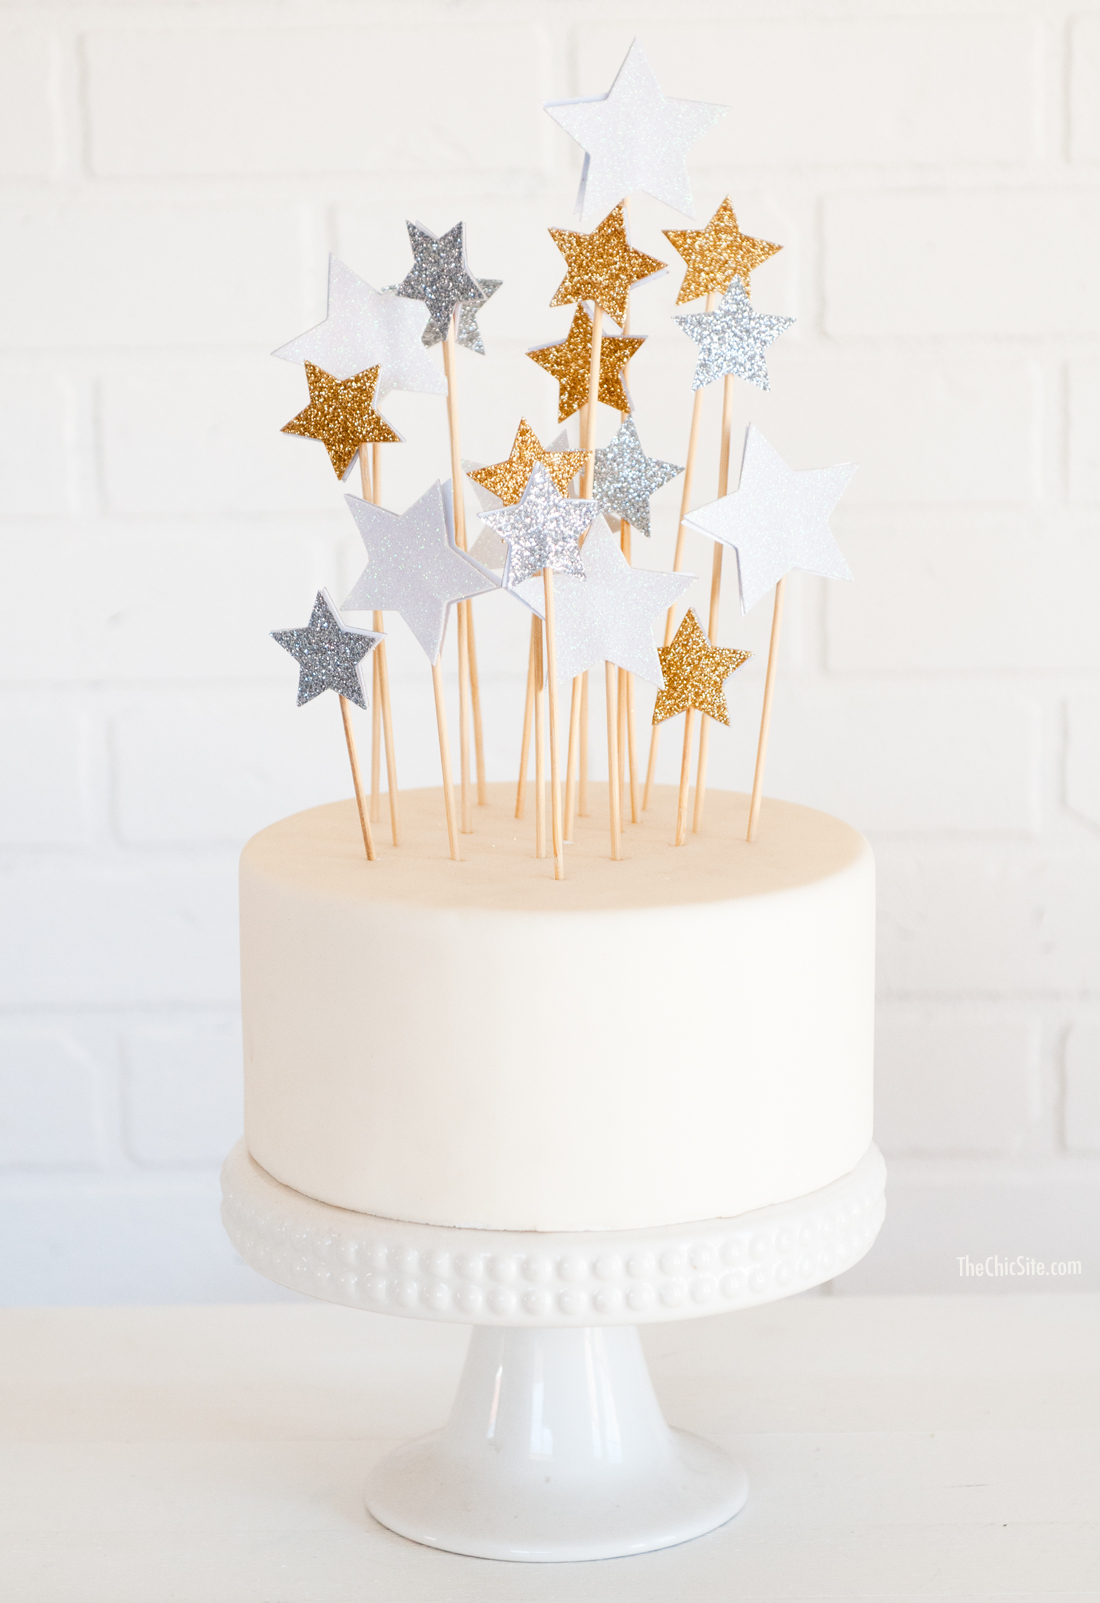 Cute-Cake-with-Star-Shape-Cake-Toppers